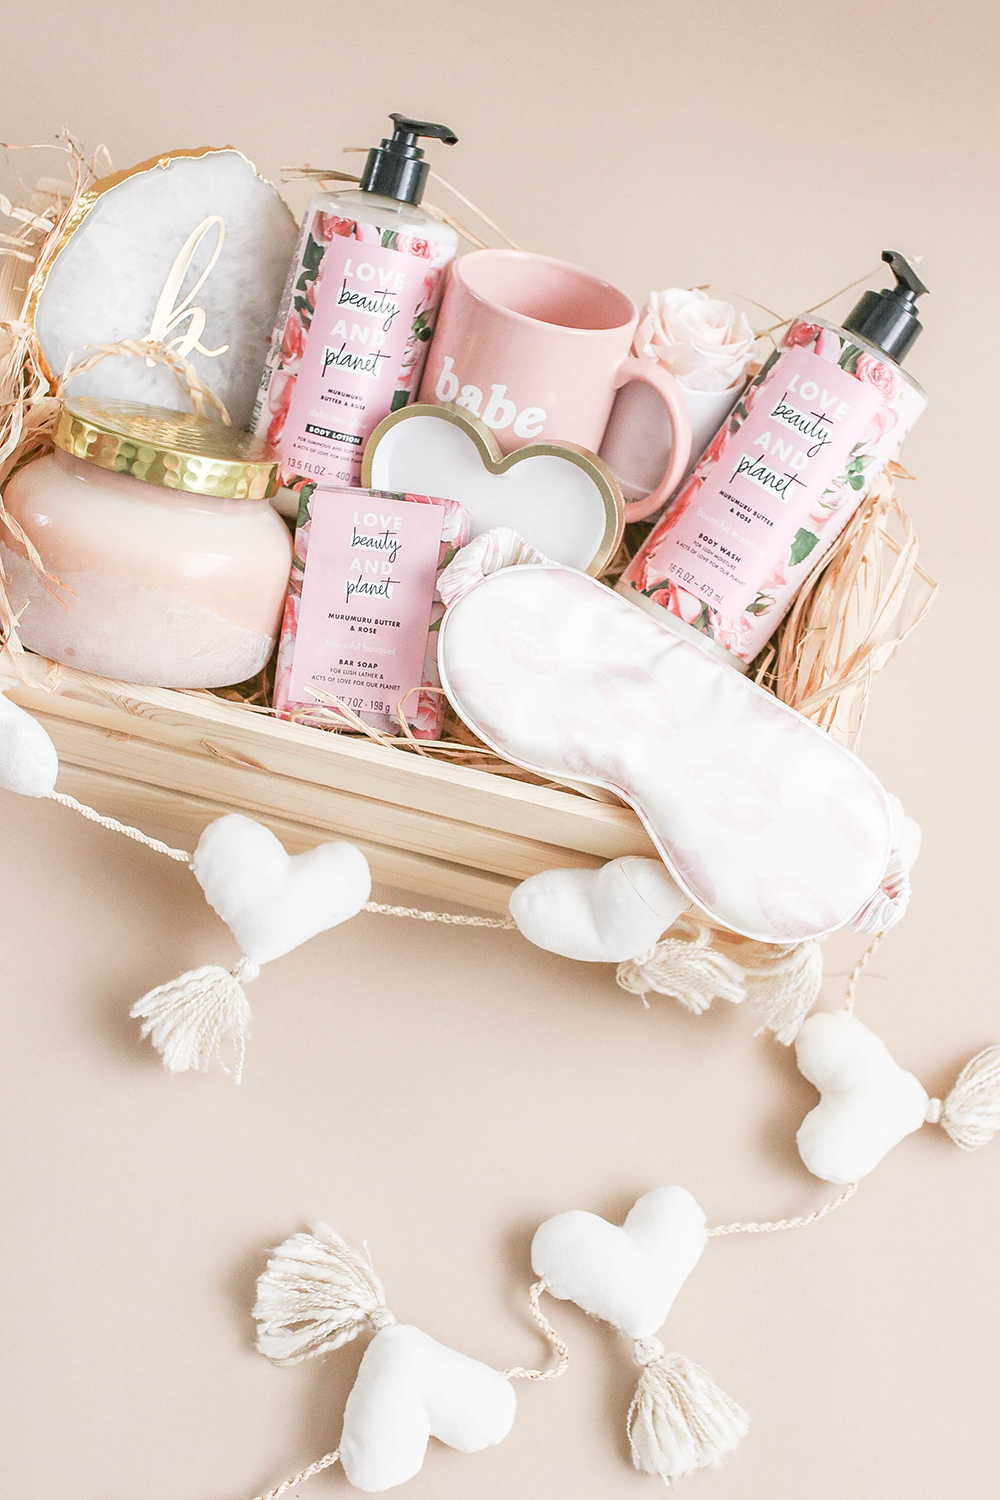 How To Create A Galentine's Gift Basket For Your Bestie - Teresa Caruso